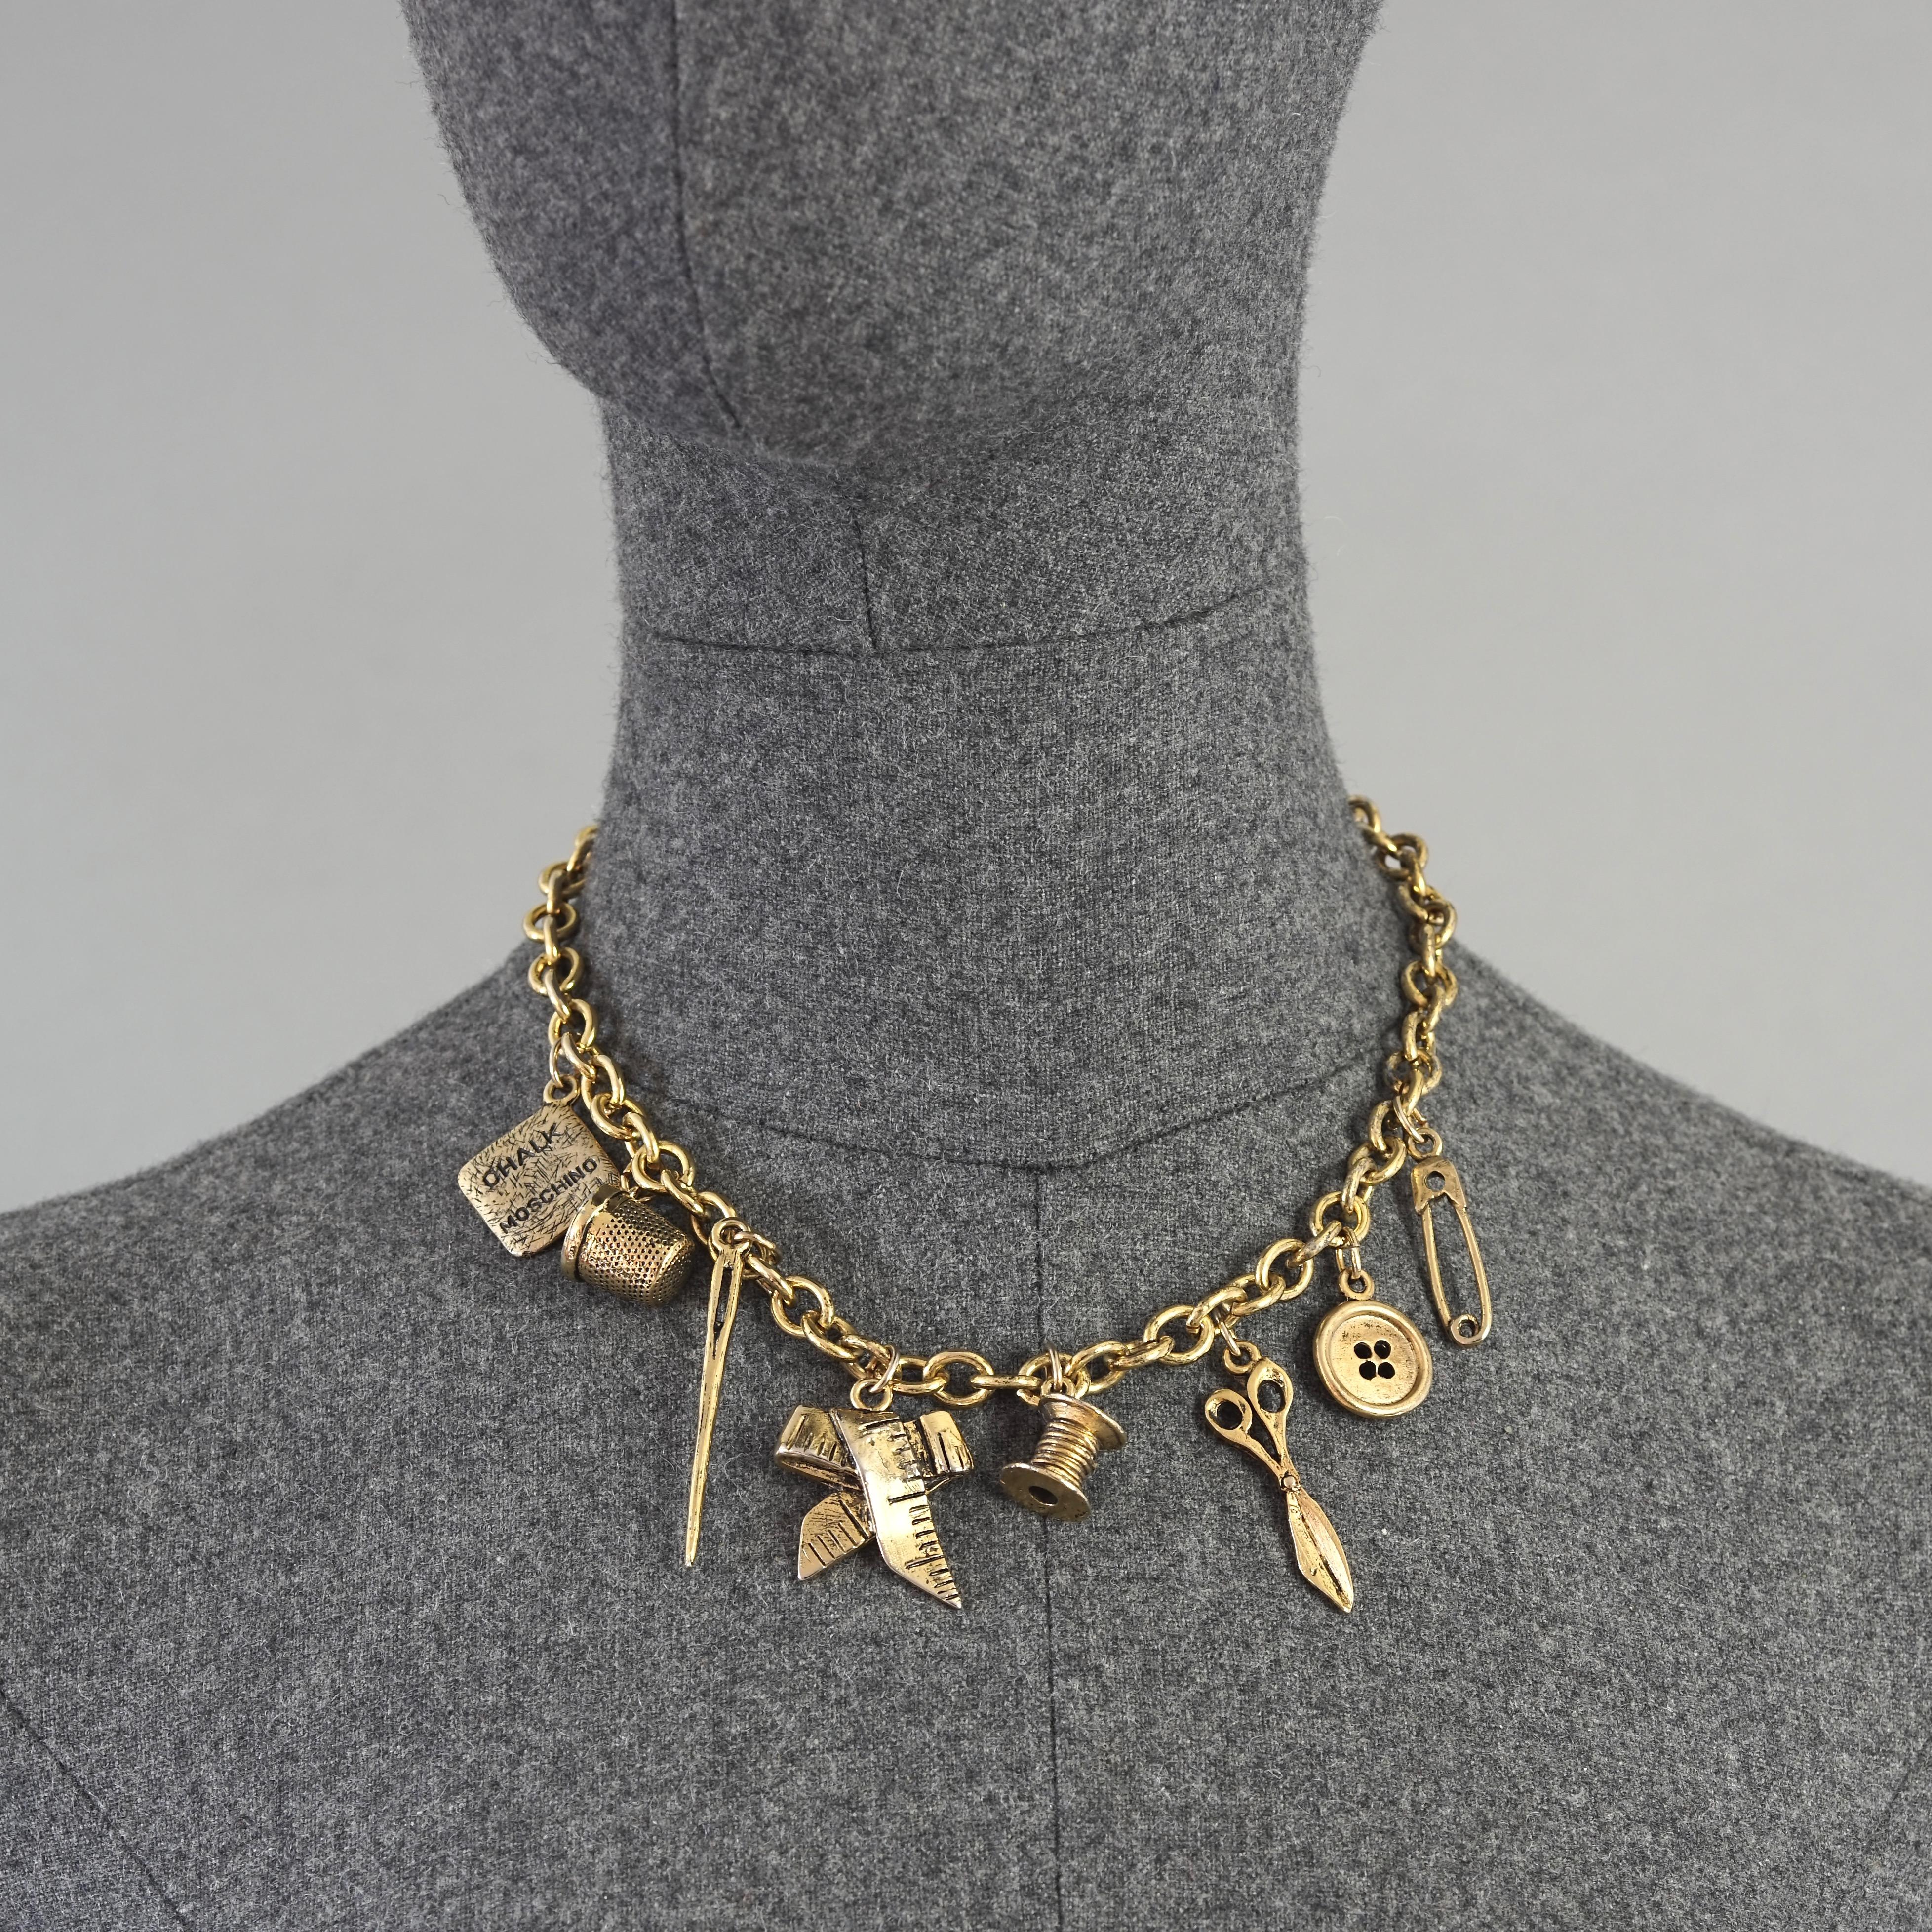 Vintage MOSCHINO Tailor's Sewing Tools Charm Necklace

Measurements: 
Height: 2.36 inches (6 cm)
Wearable Length: 16.53 inches (42 cm)

Features:
- 100% Authentic MOSCHINO.
- Tailor's essential sewing tools charm novelty necklace.
- Charms: tailor's